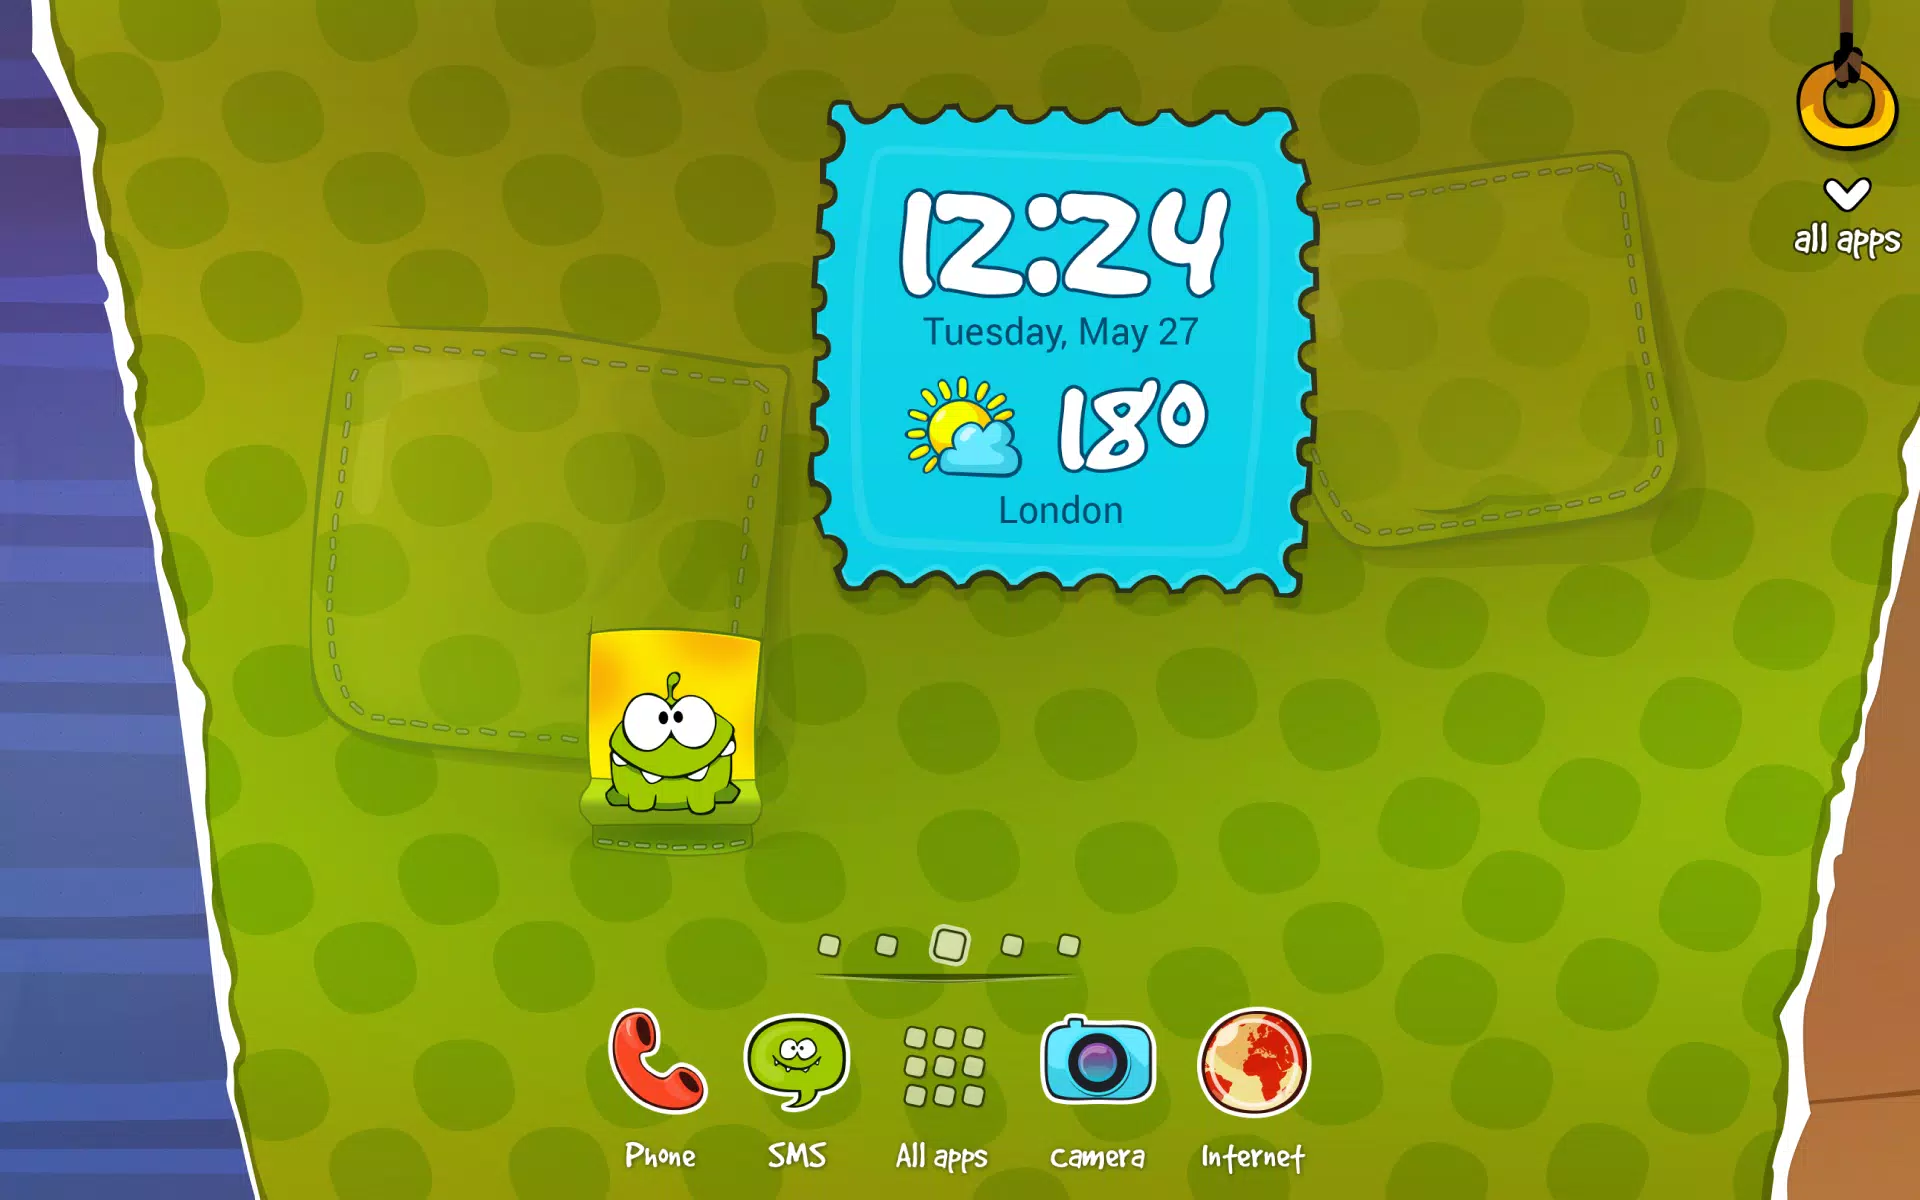 Cut the Rope Theme APK for Android Download